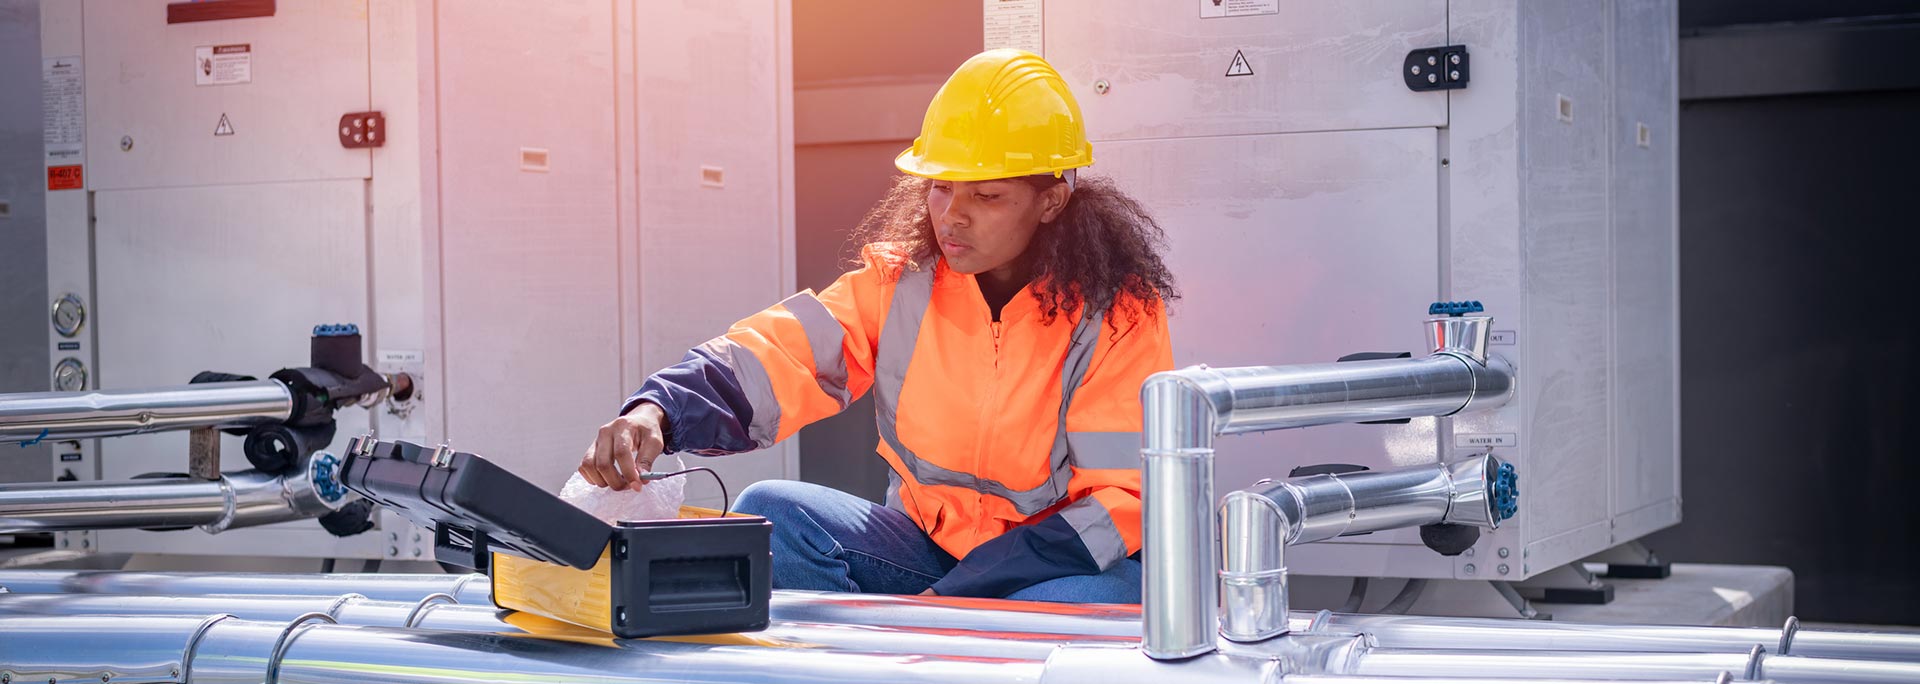 Native American woman wearing hard hat working outside on an industrial AC system.